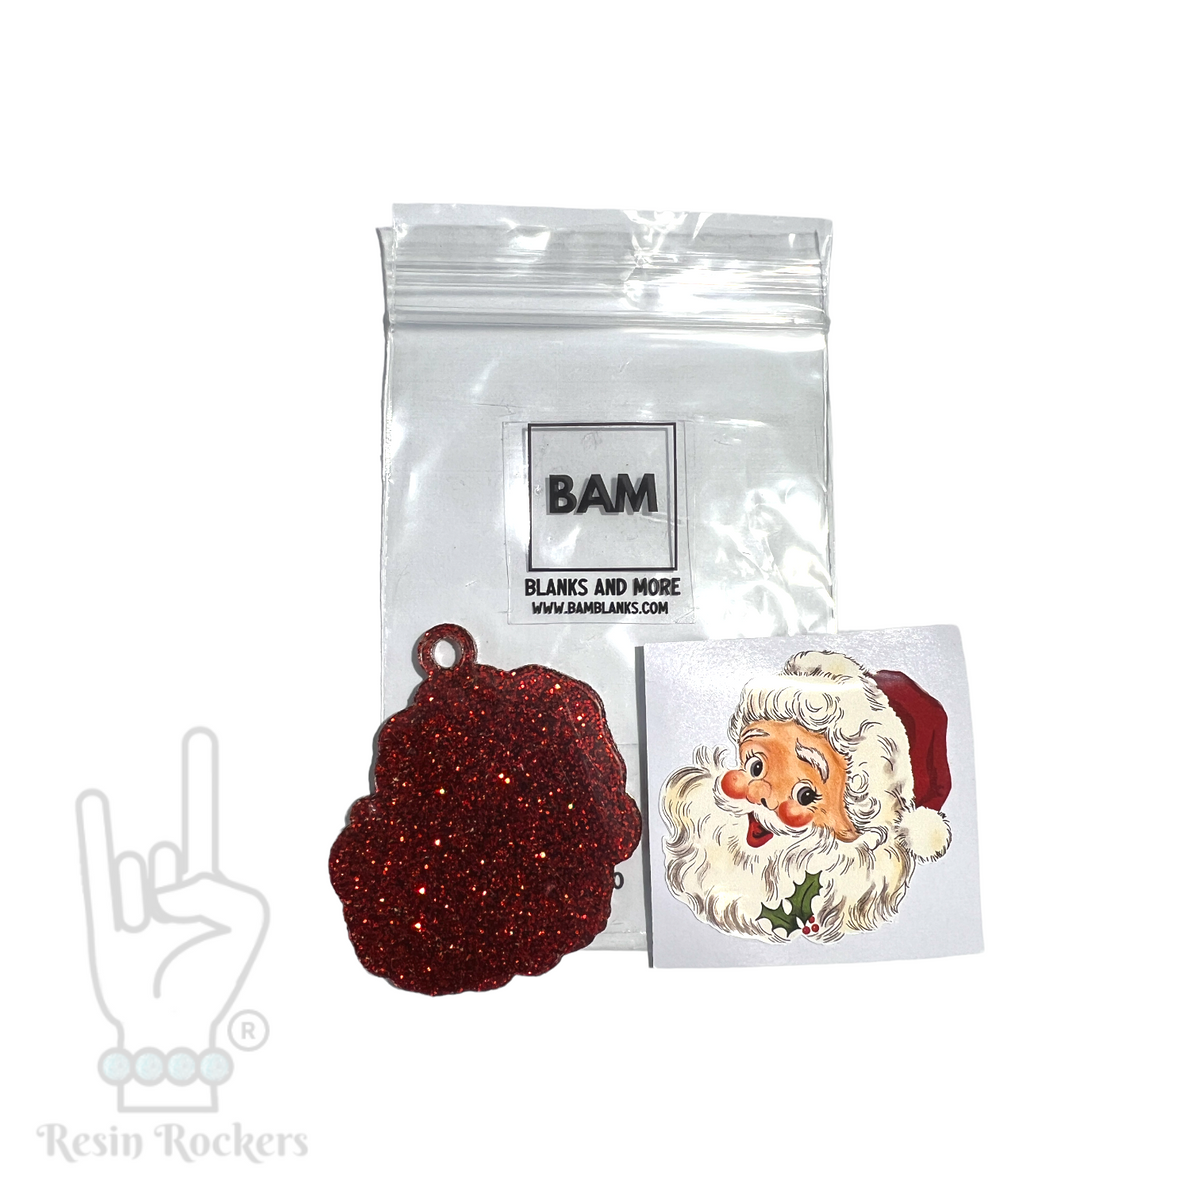 BAM BLANKS Holiday Decal and Glitter Acrylic Shape Sets - Resin Rockers